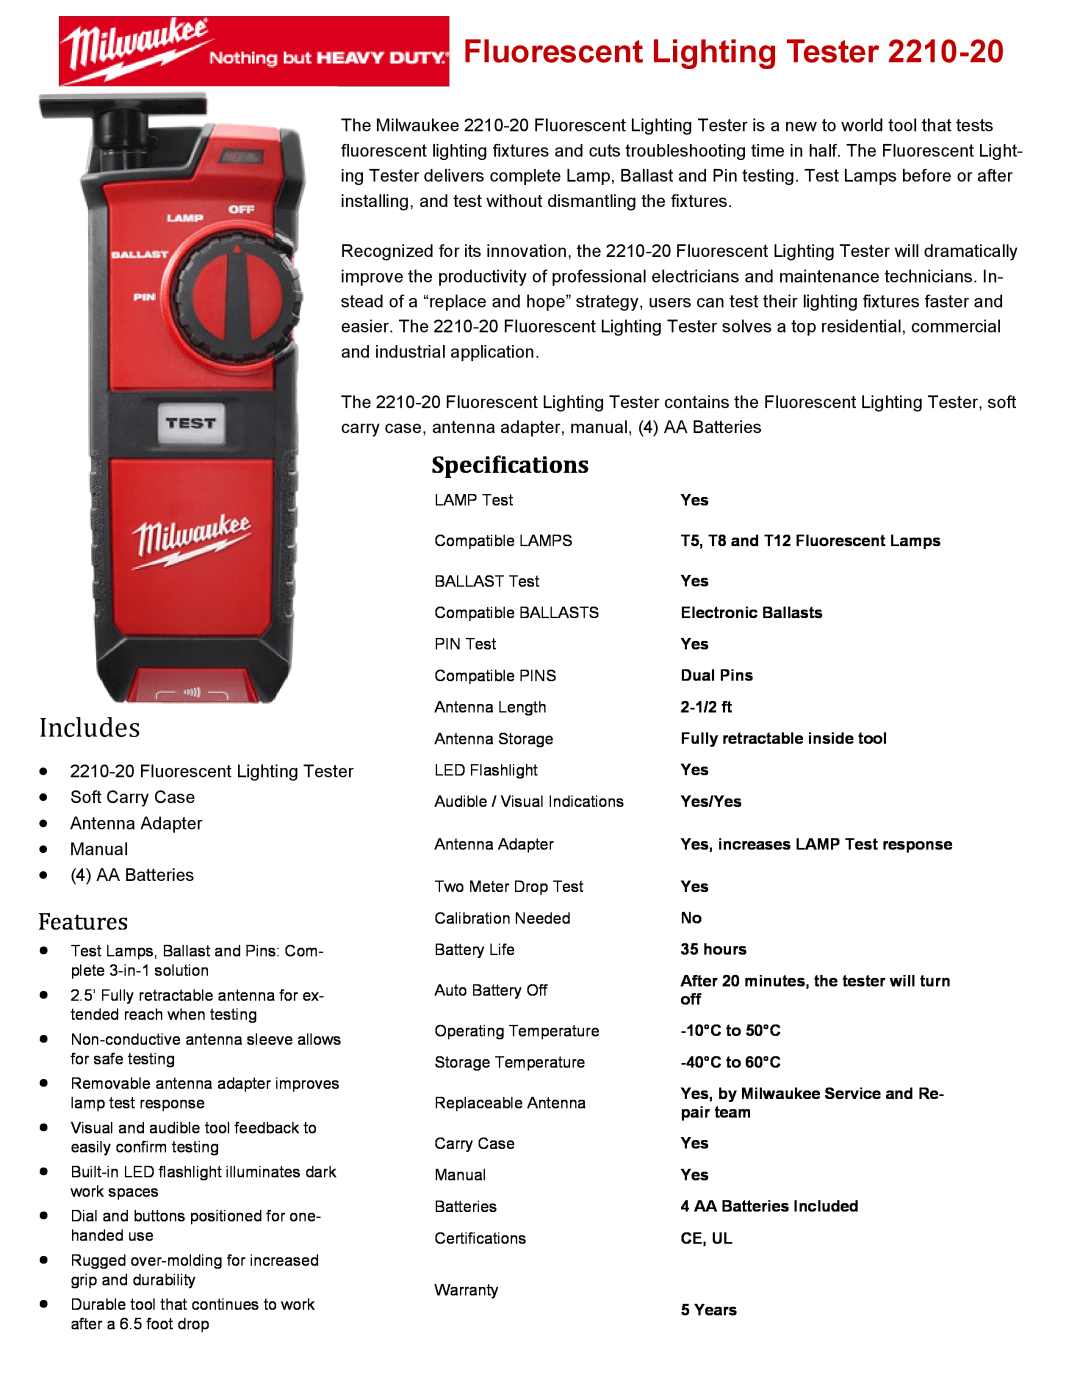 Milwaukee 2210-20 specifications Fluorescent Lighting Tester, Includes, Specifications, Features 